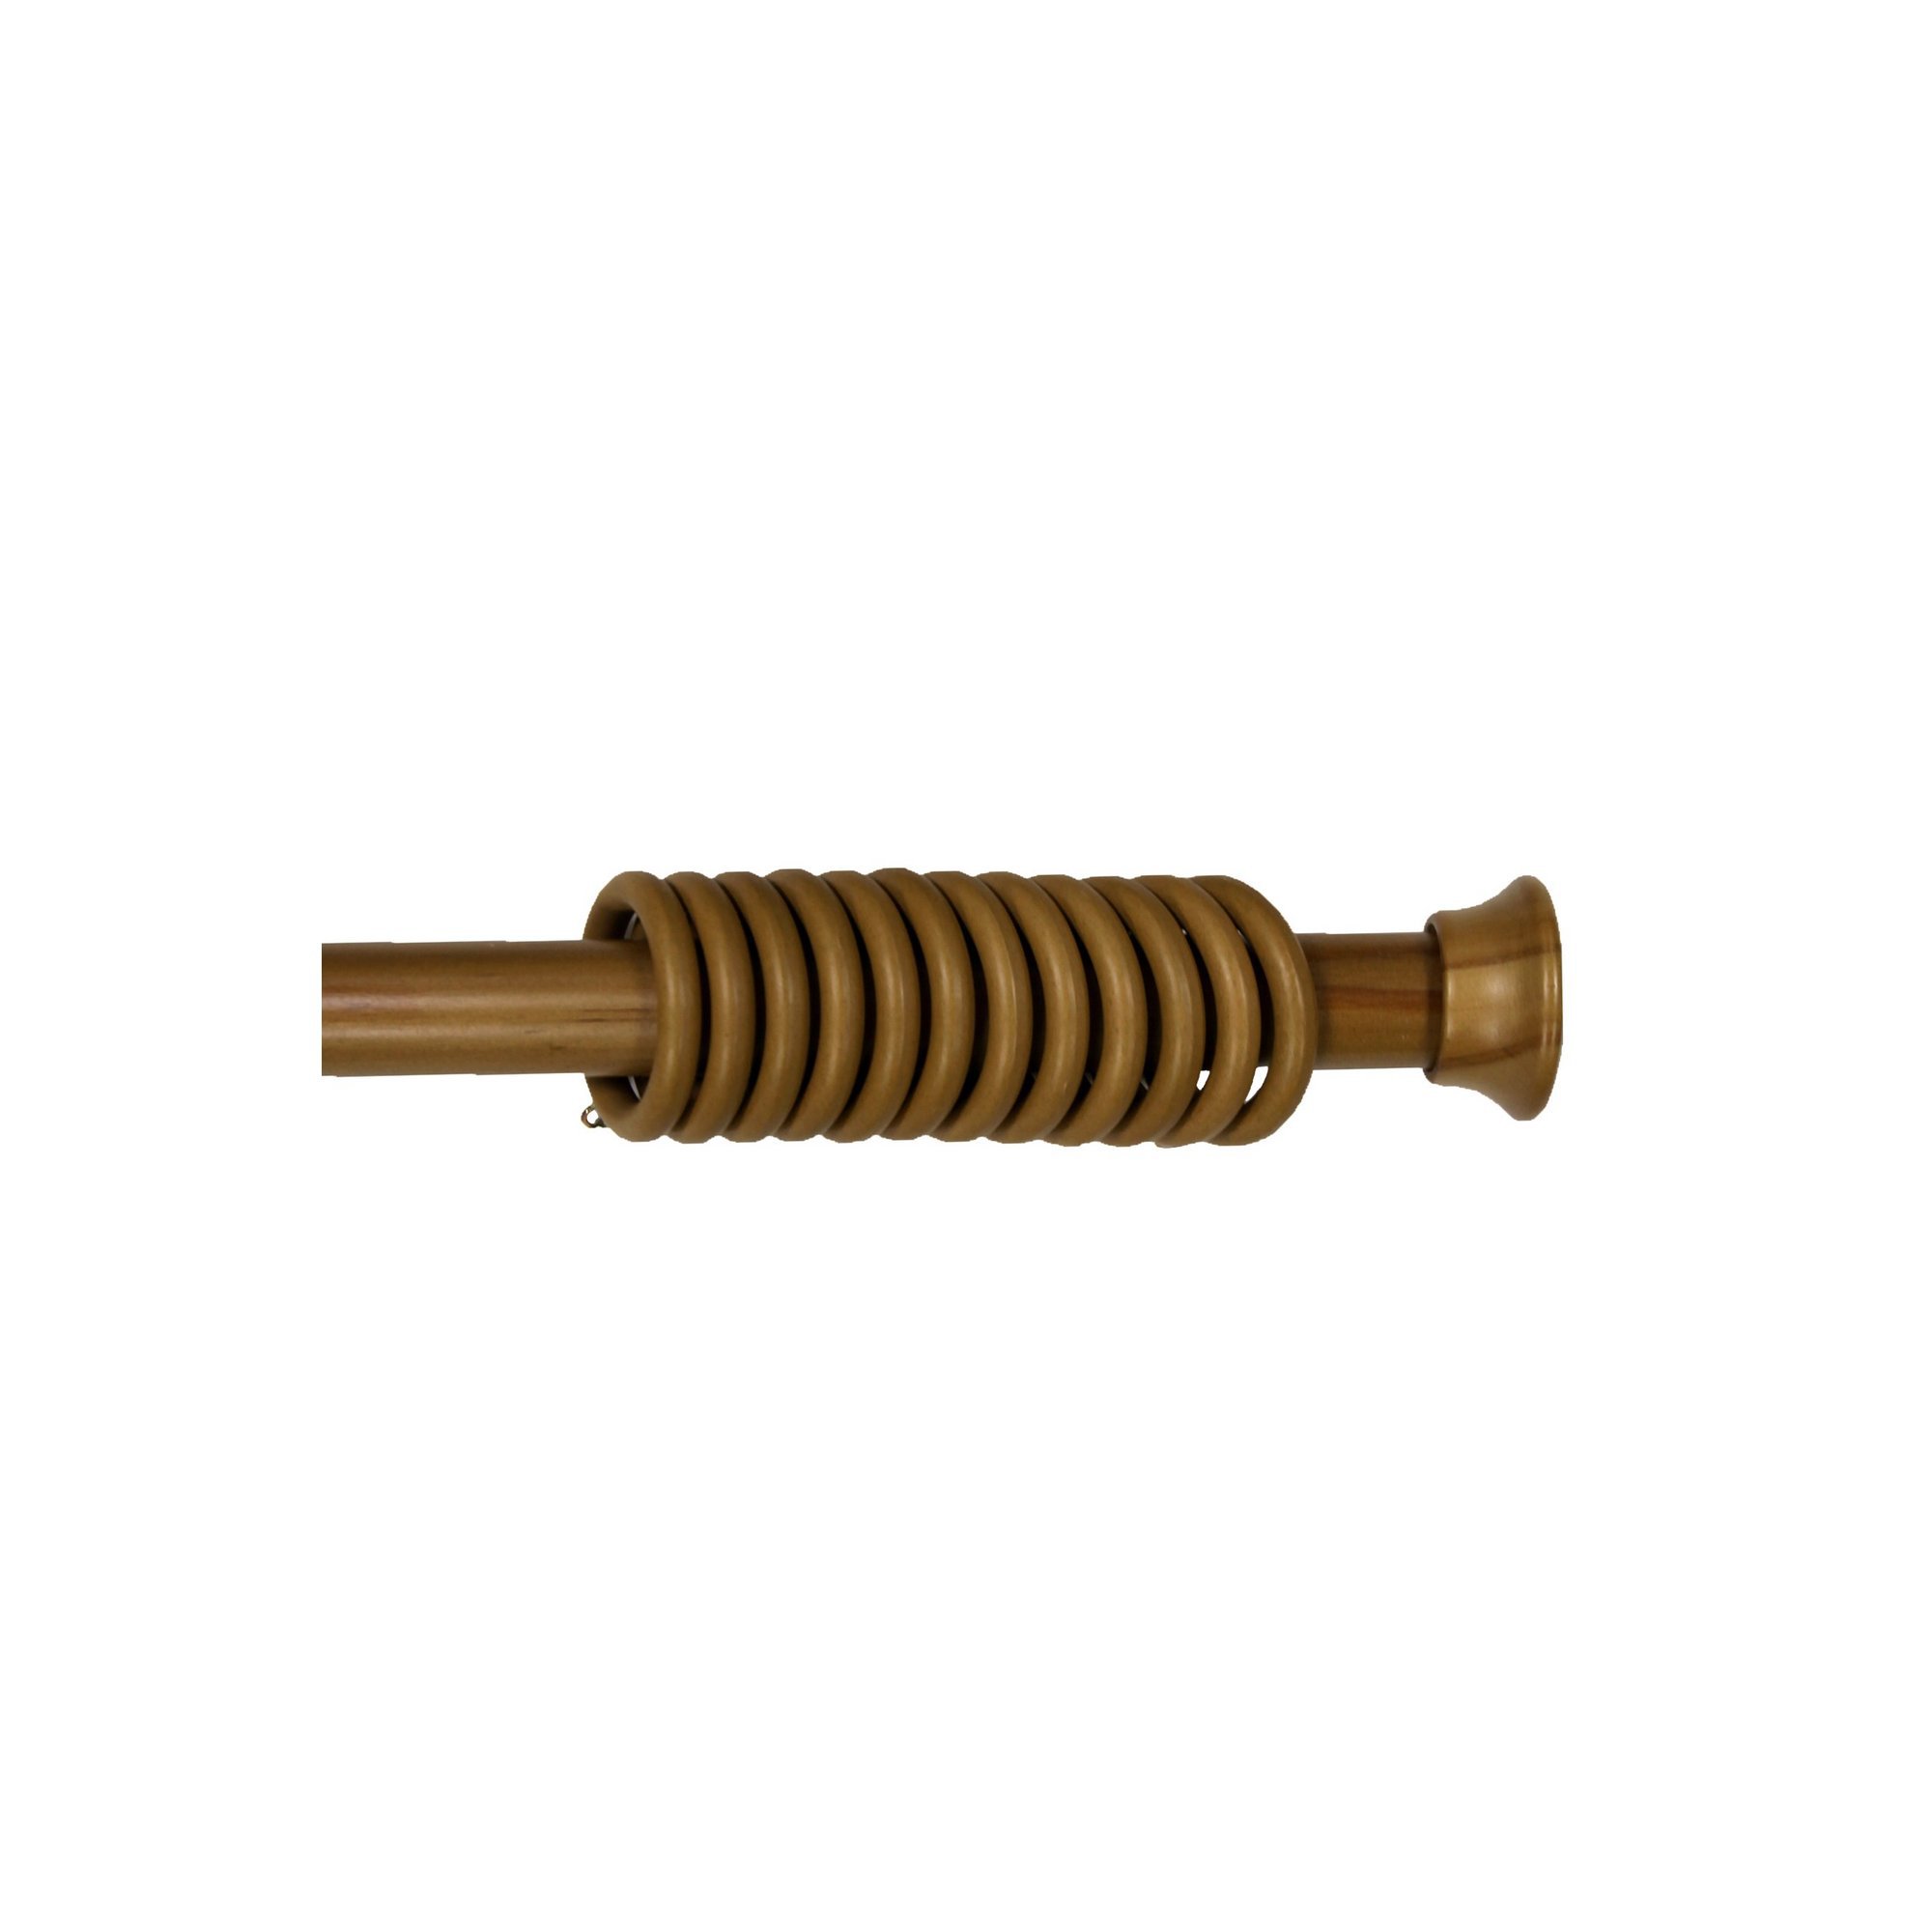 Galloway Stopper 28mm Wooden Curtain Pole